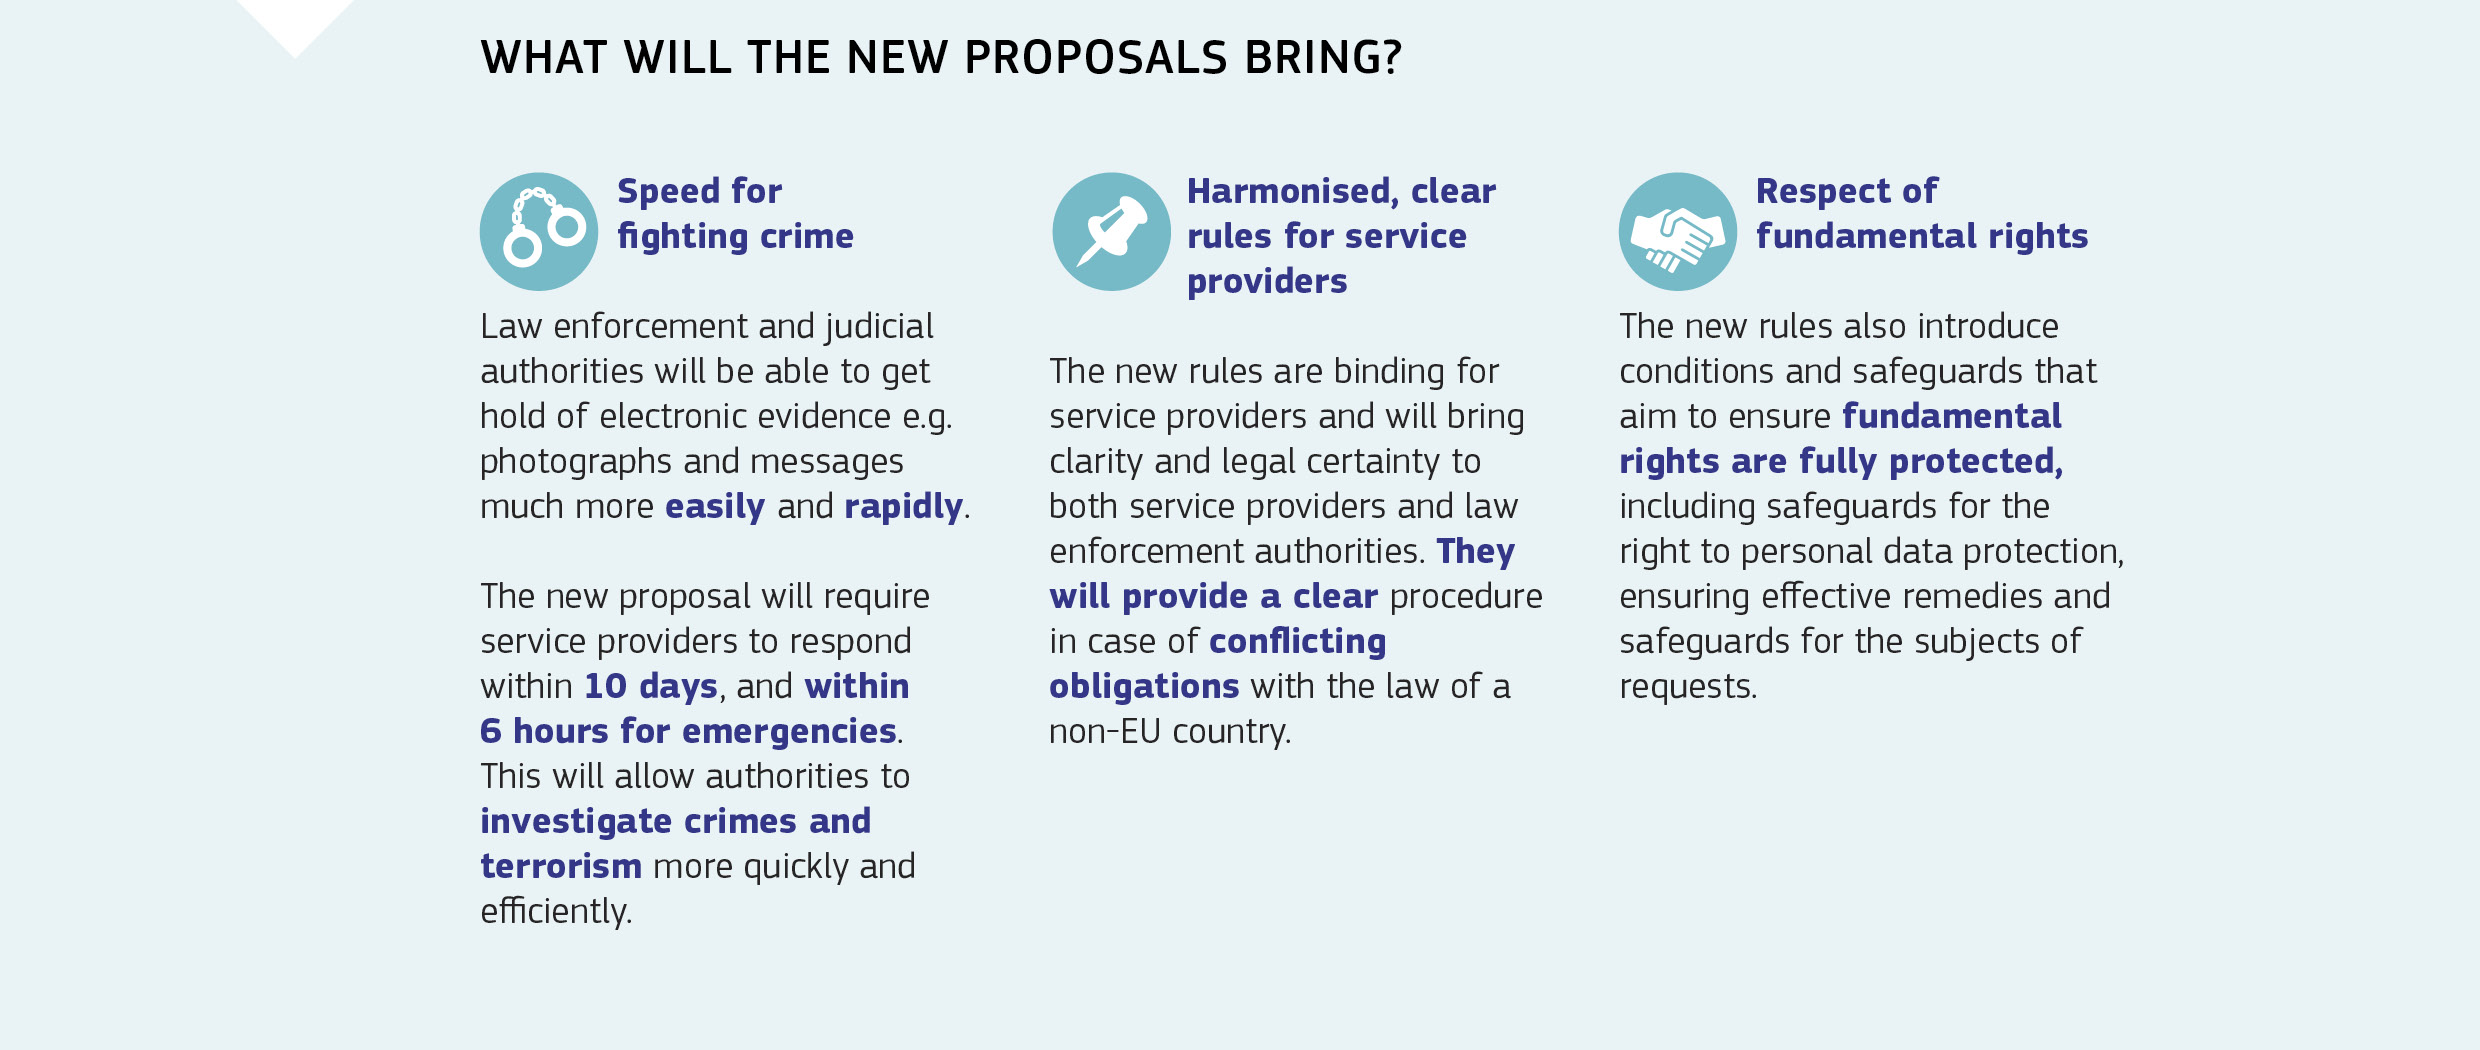 WHAT WILL THE NEW PROPOSALS BRING?